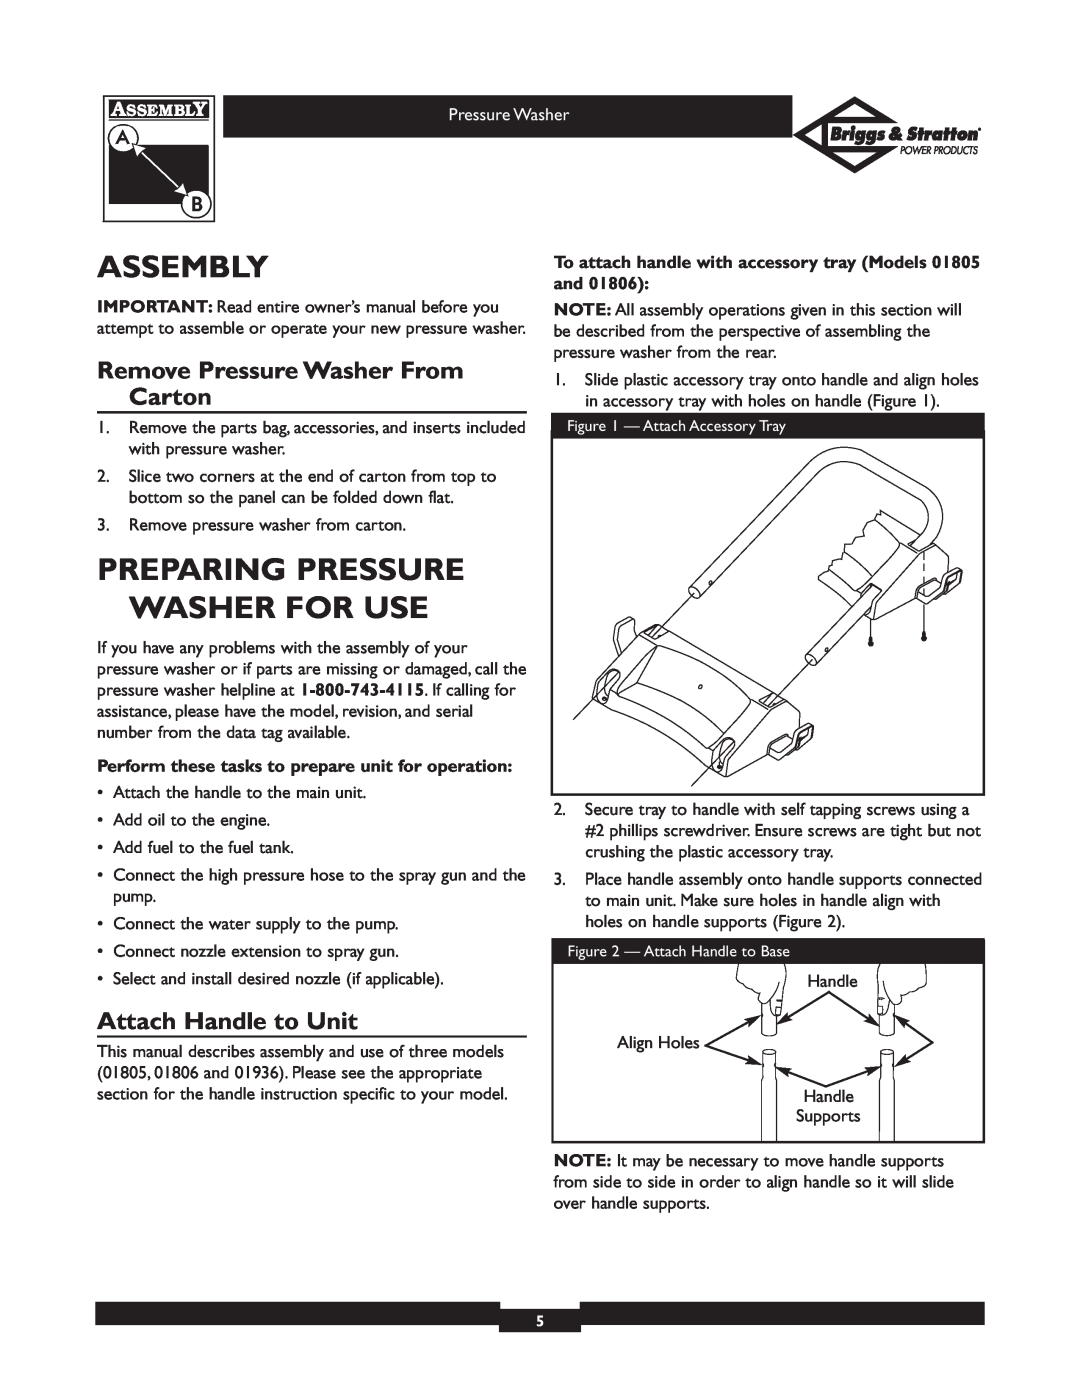 Briggs & Stratton 01936 owner manual Assembly, Preparing Pressure Washer For Use, Remove Pressure Washer From Carton 